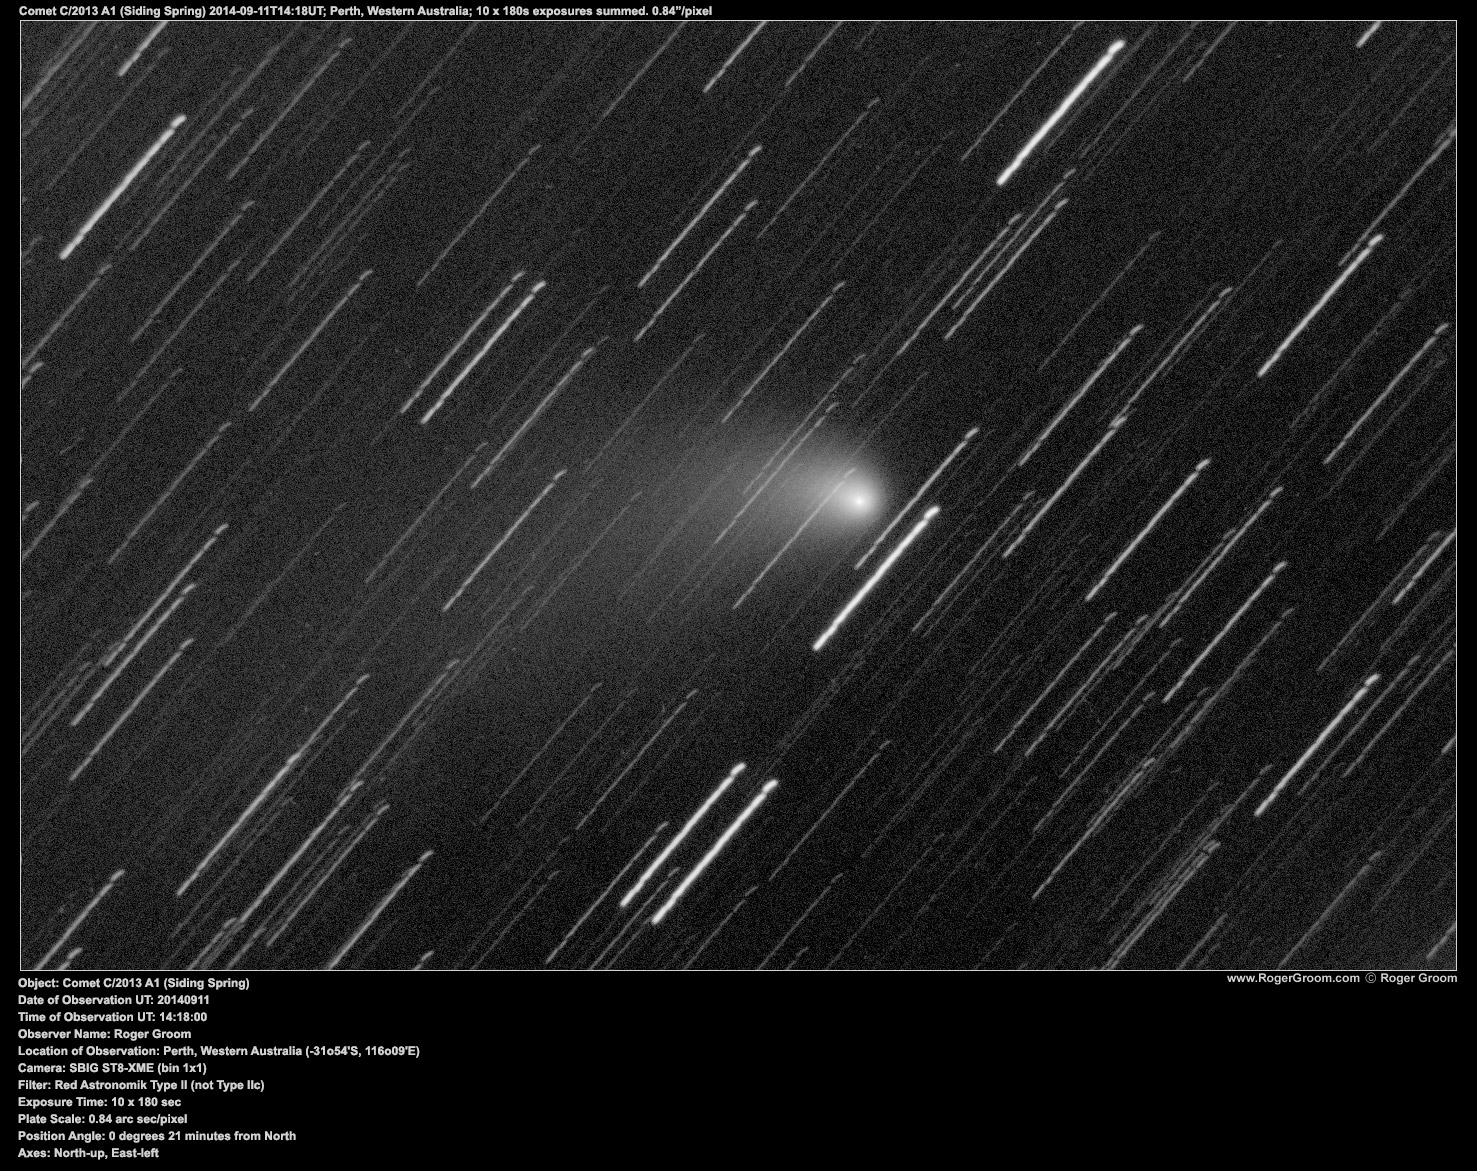 Object: Comet C/2013 A1 (Siding Spring) Date of Observation UT: 20140911 Time of Observation UT: 14:18:00 Observer Name: Roger Groom Location of Observation: Perth, Western Australia (-31o54'S, 116o09'E) Camera: SBIG ST8-XME (bin 1x1) Filter: Red Astronomik Type II (not Type IIc) Exposure Time: 10 x 180 sec Plate Scale: 0.84 arc sec/pixel Position Angle: 0 degrees 21 minutes from North Axes: North-up, East-left